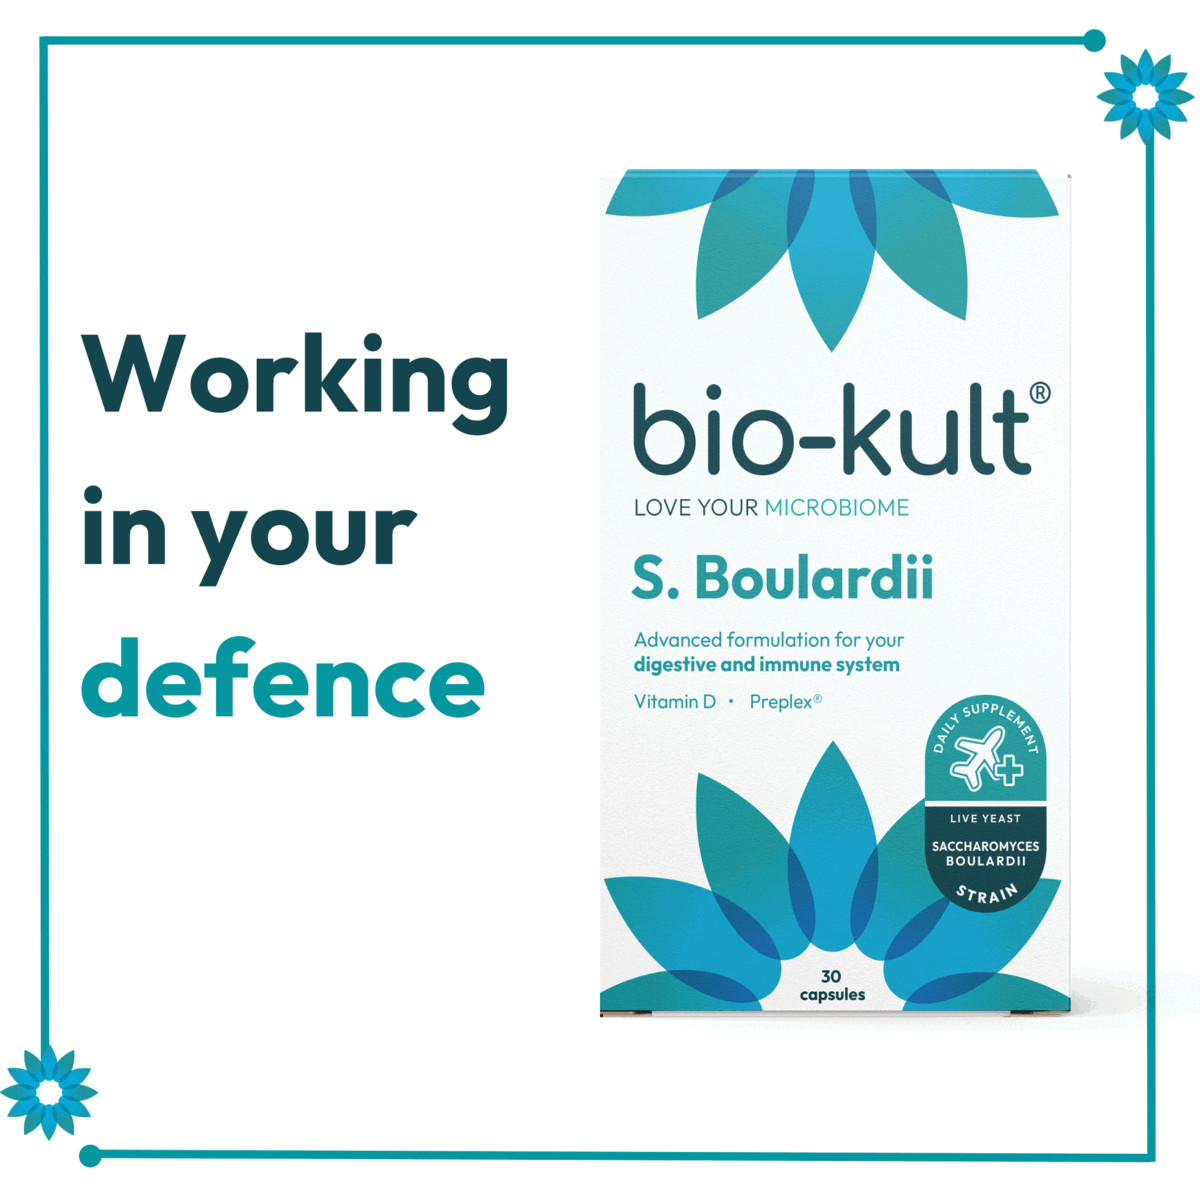 Working in your defence, the little flower with a whole lot of power, new look some award winning bacteria inside! higly recommended - life saver, fantastic - i just can't believe it, great product, we can't hold in our excitement!